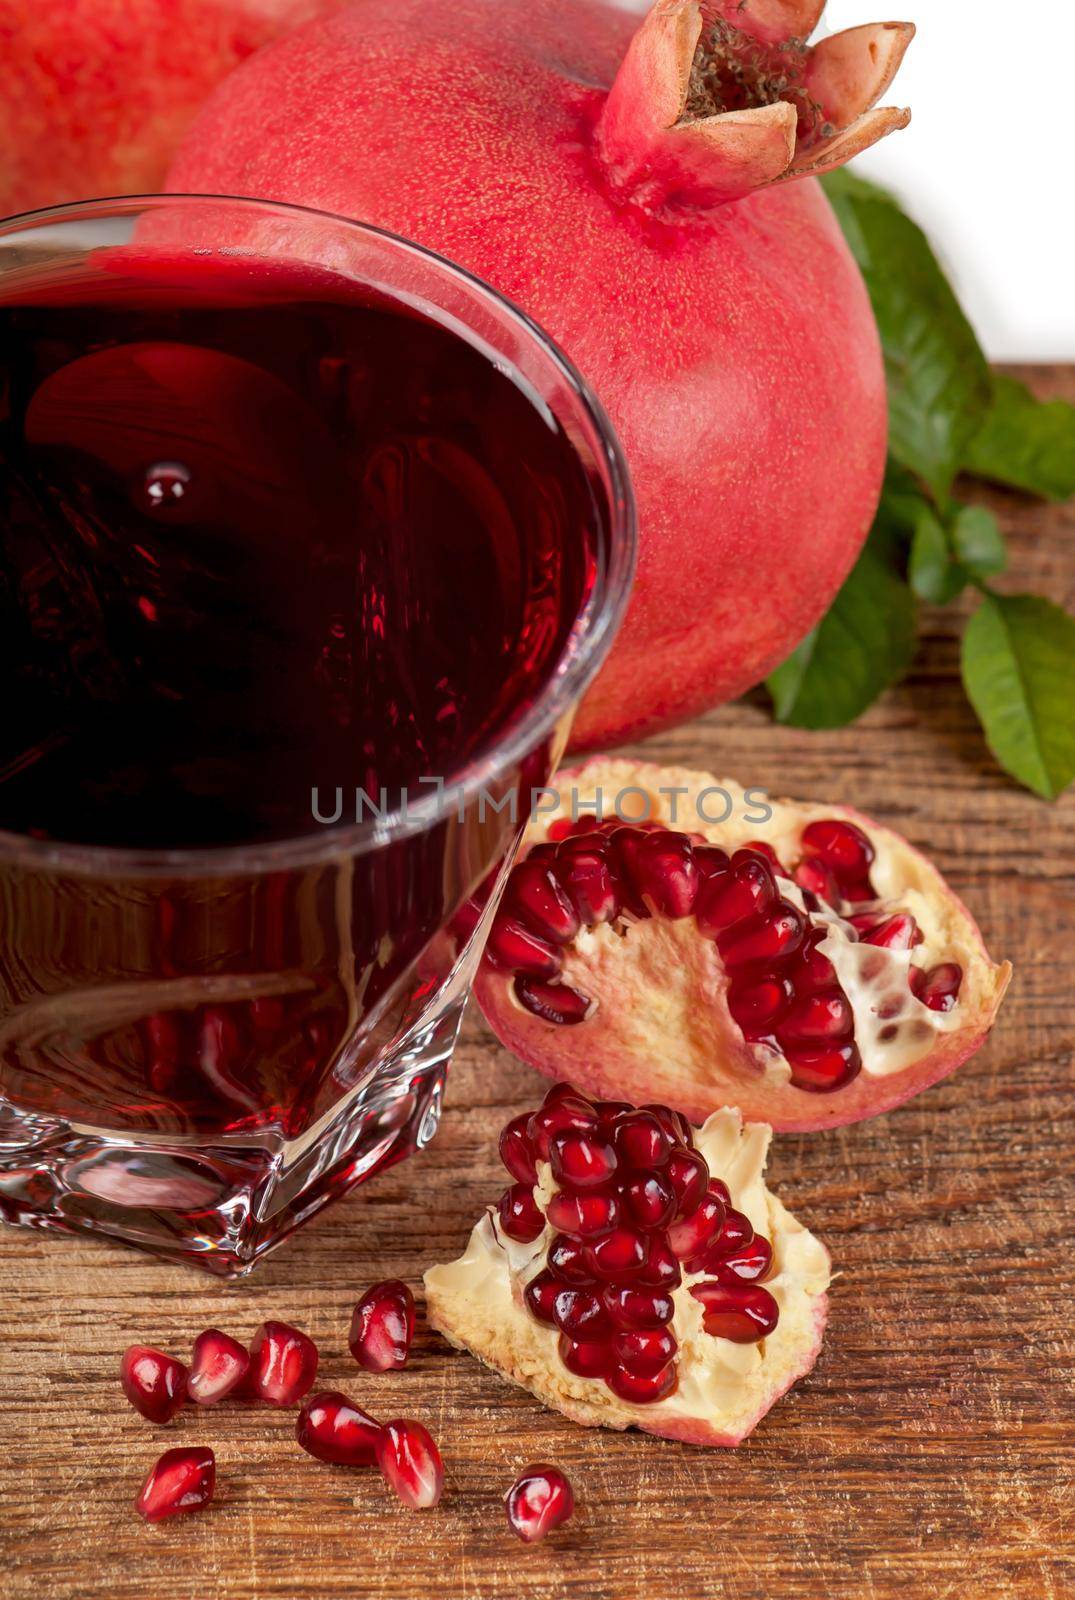 Garnet juice in a glass and pomegranate on wooden boards, on natural fabric